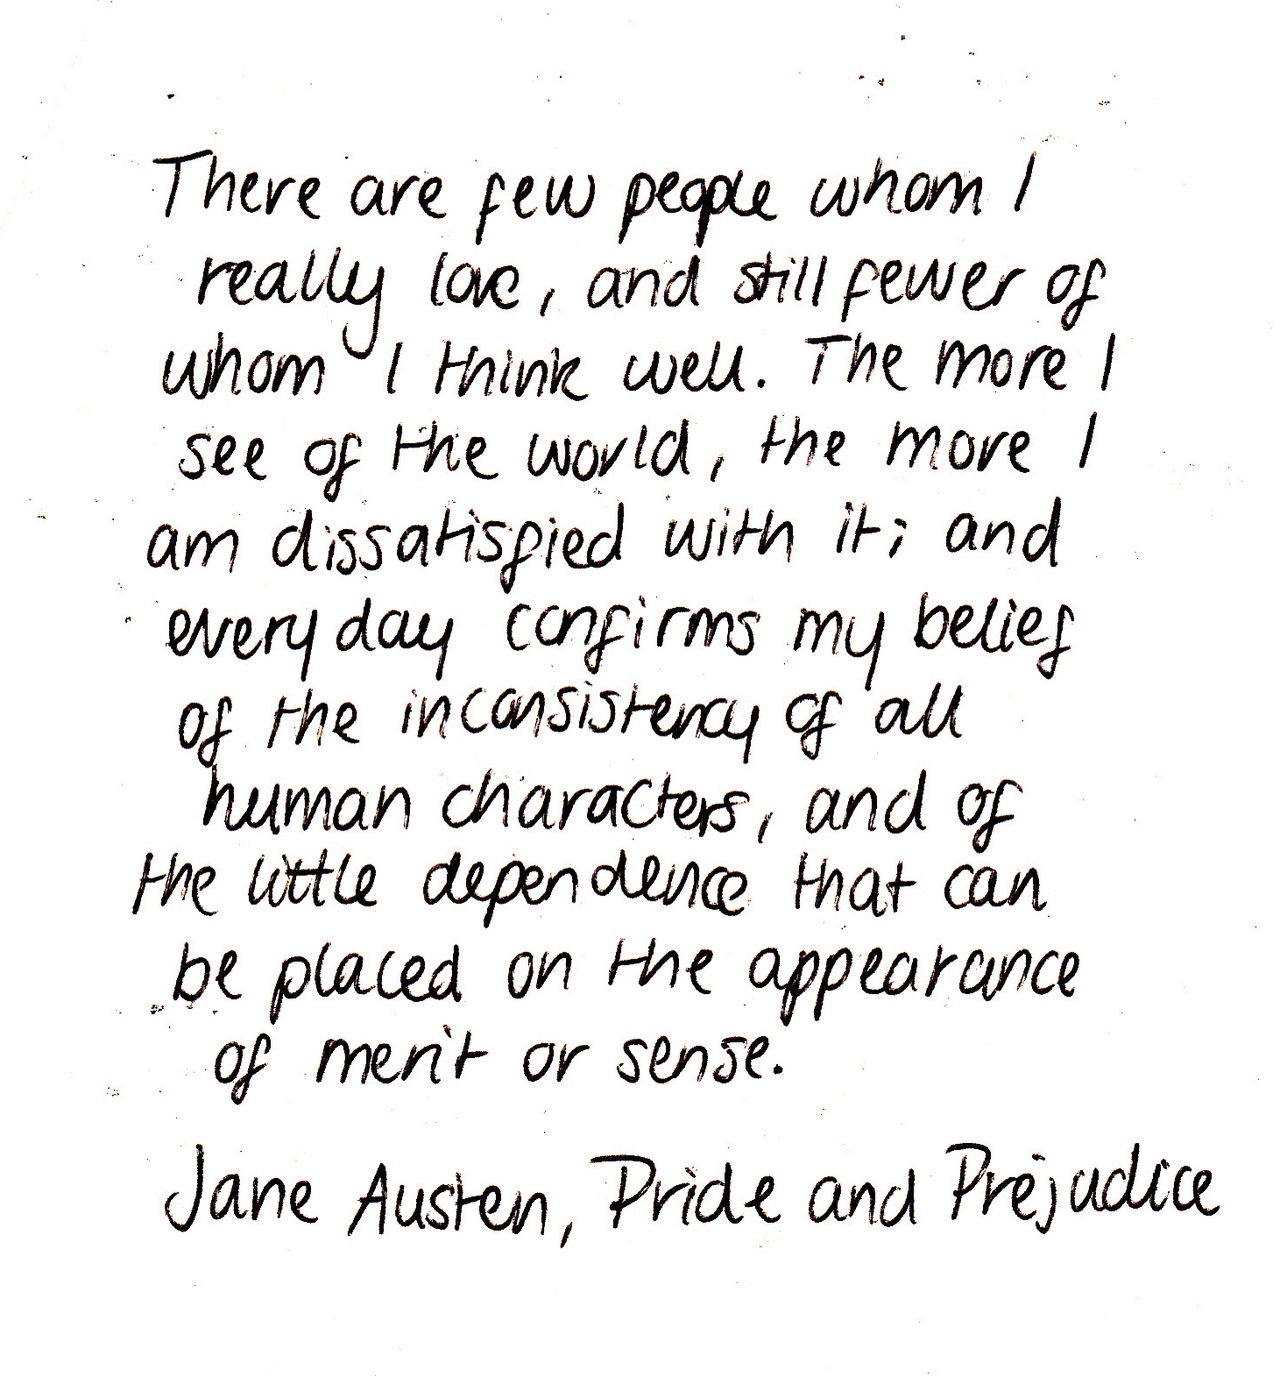 There are few people whom I really love and still fewer of whom I think well. The more I see of the world, the more am I dissatisfied with it; and every day ... Jane Austen